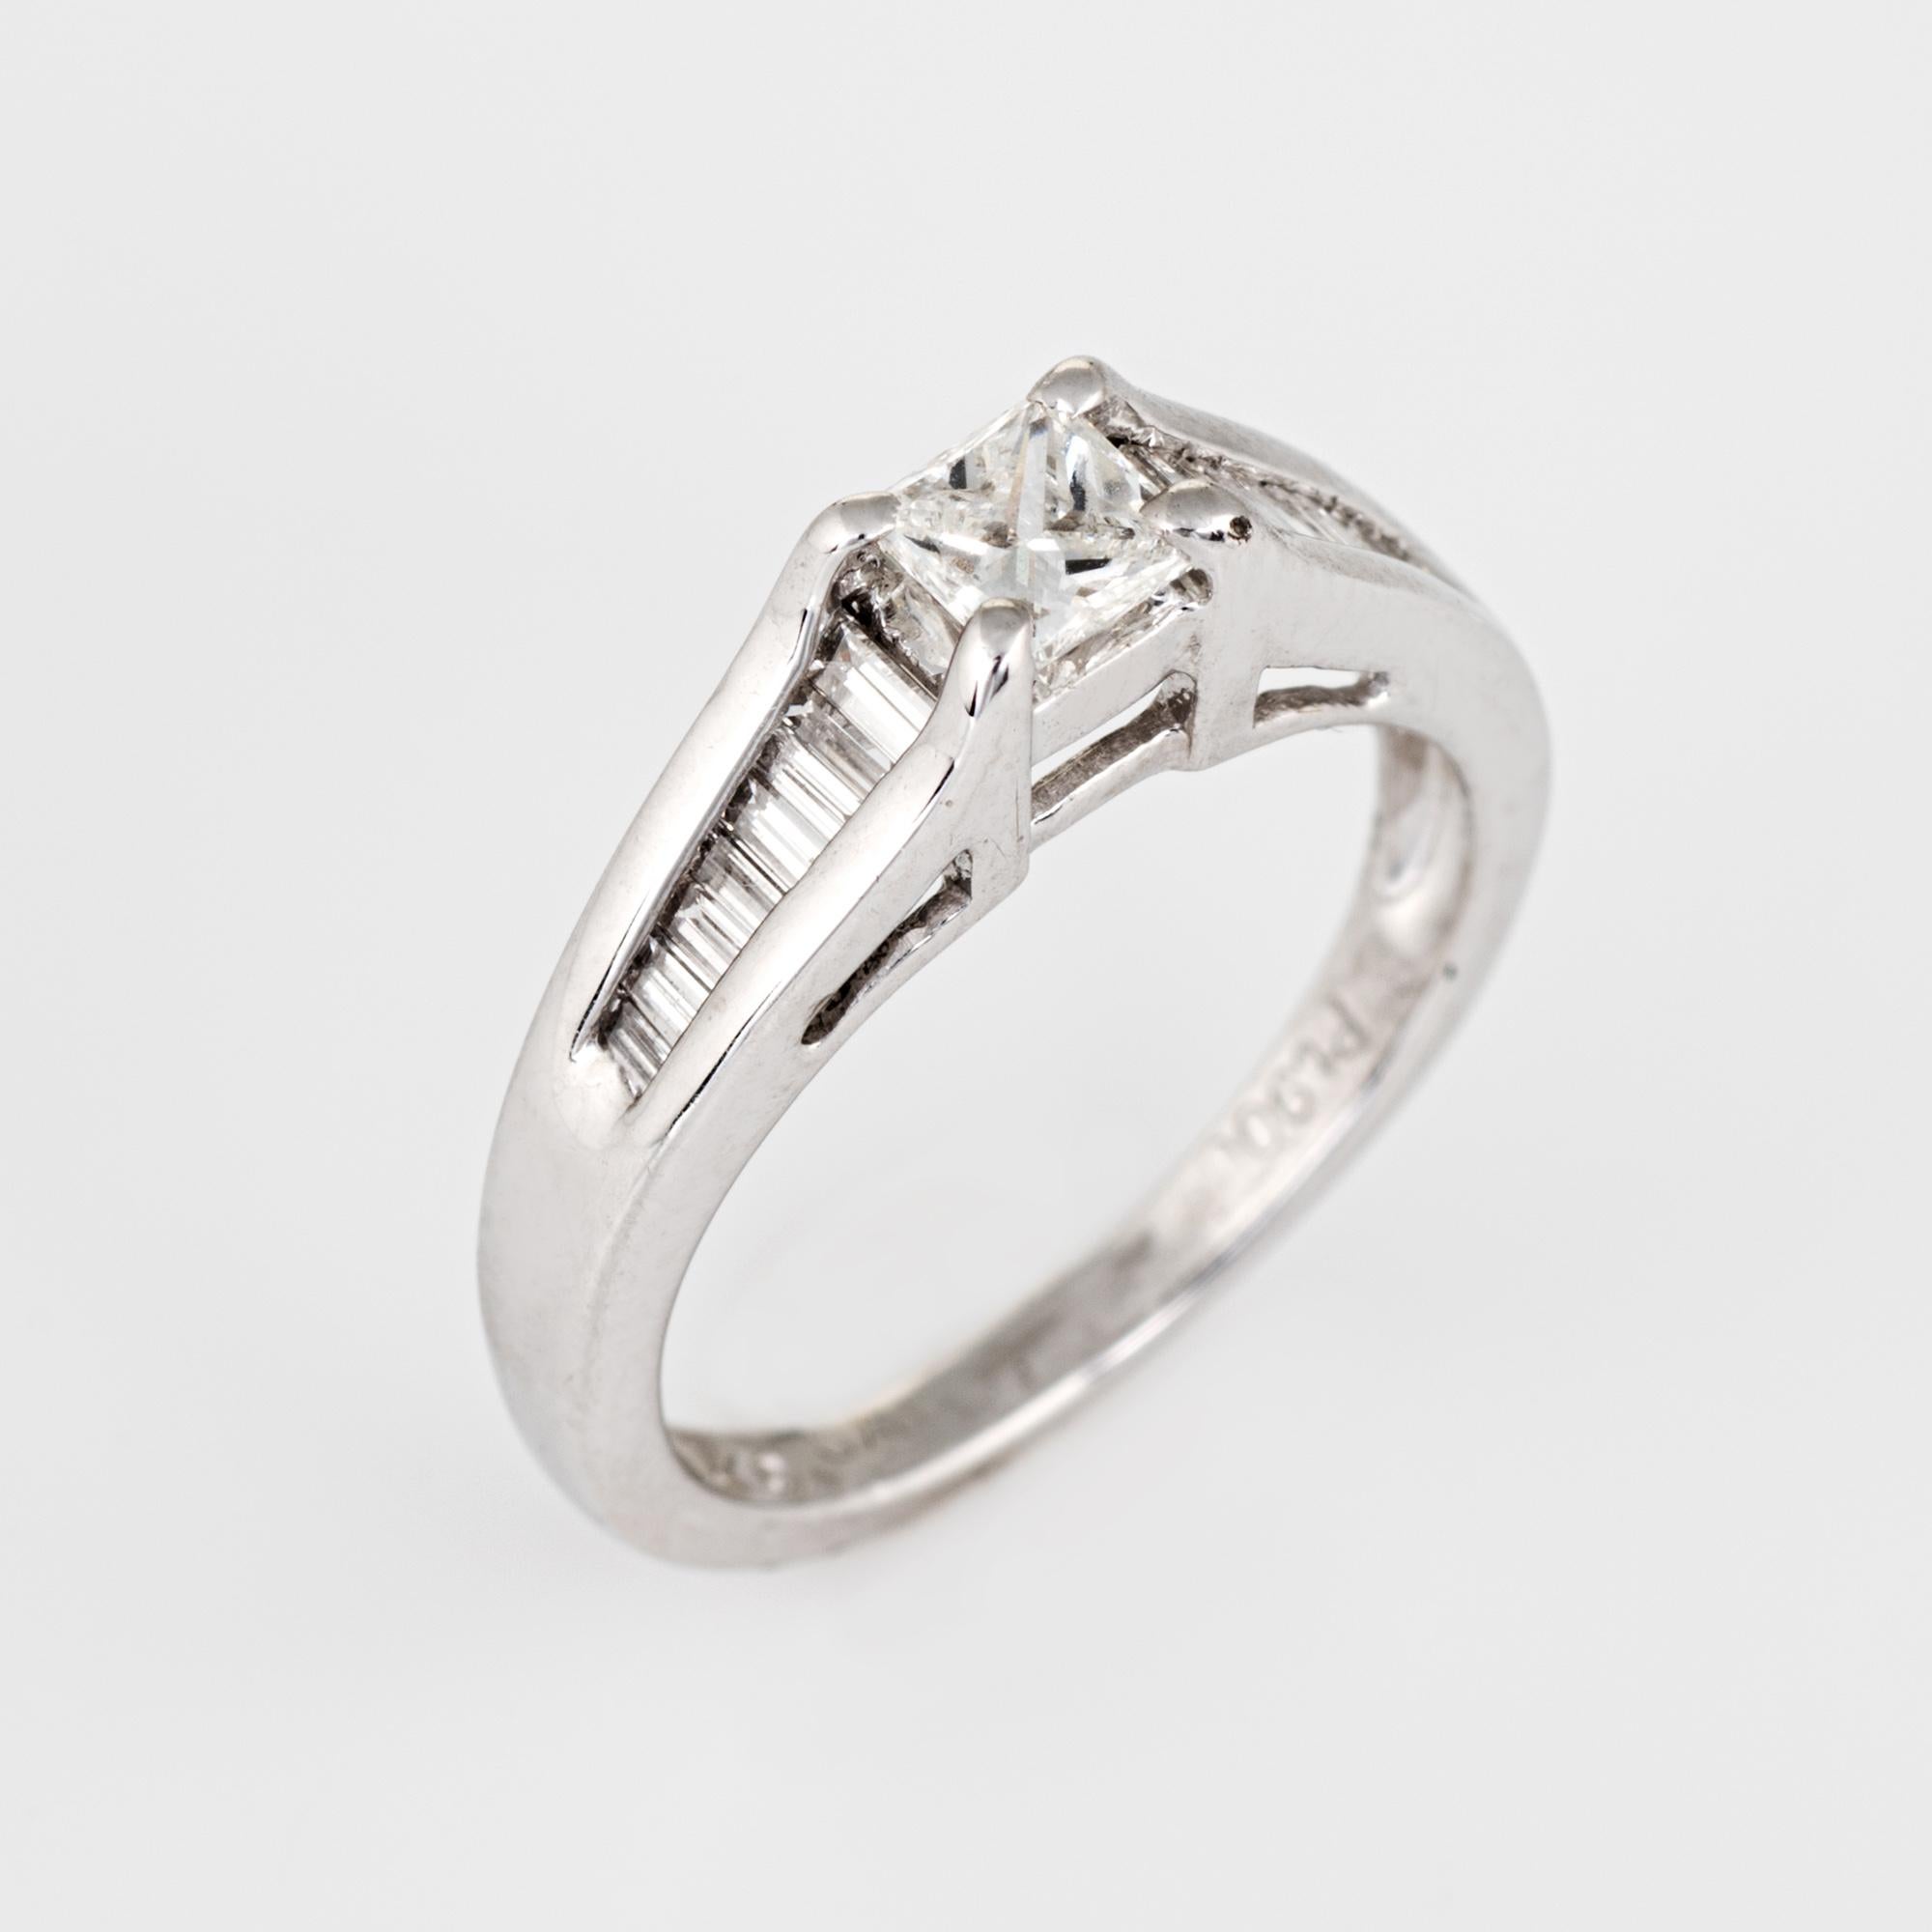 Finely detailed mixed cut diamond engagement ring crafted in 900 platinum. 

Centrally mounted estimated 0.25 carat princess cut diamond is accented with an estimated 0.48 carats of straight baguette cut diamonds. The total diamond weight is